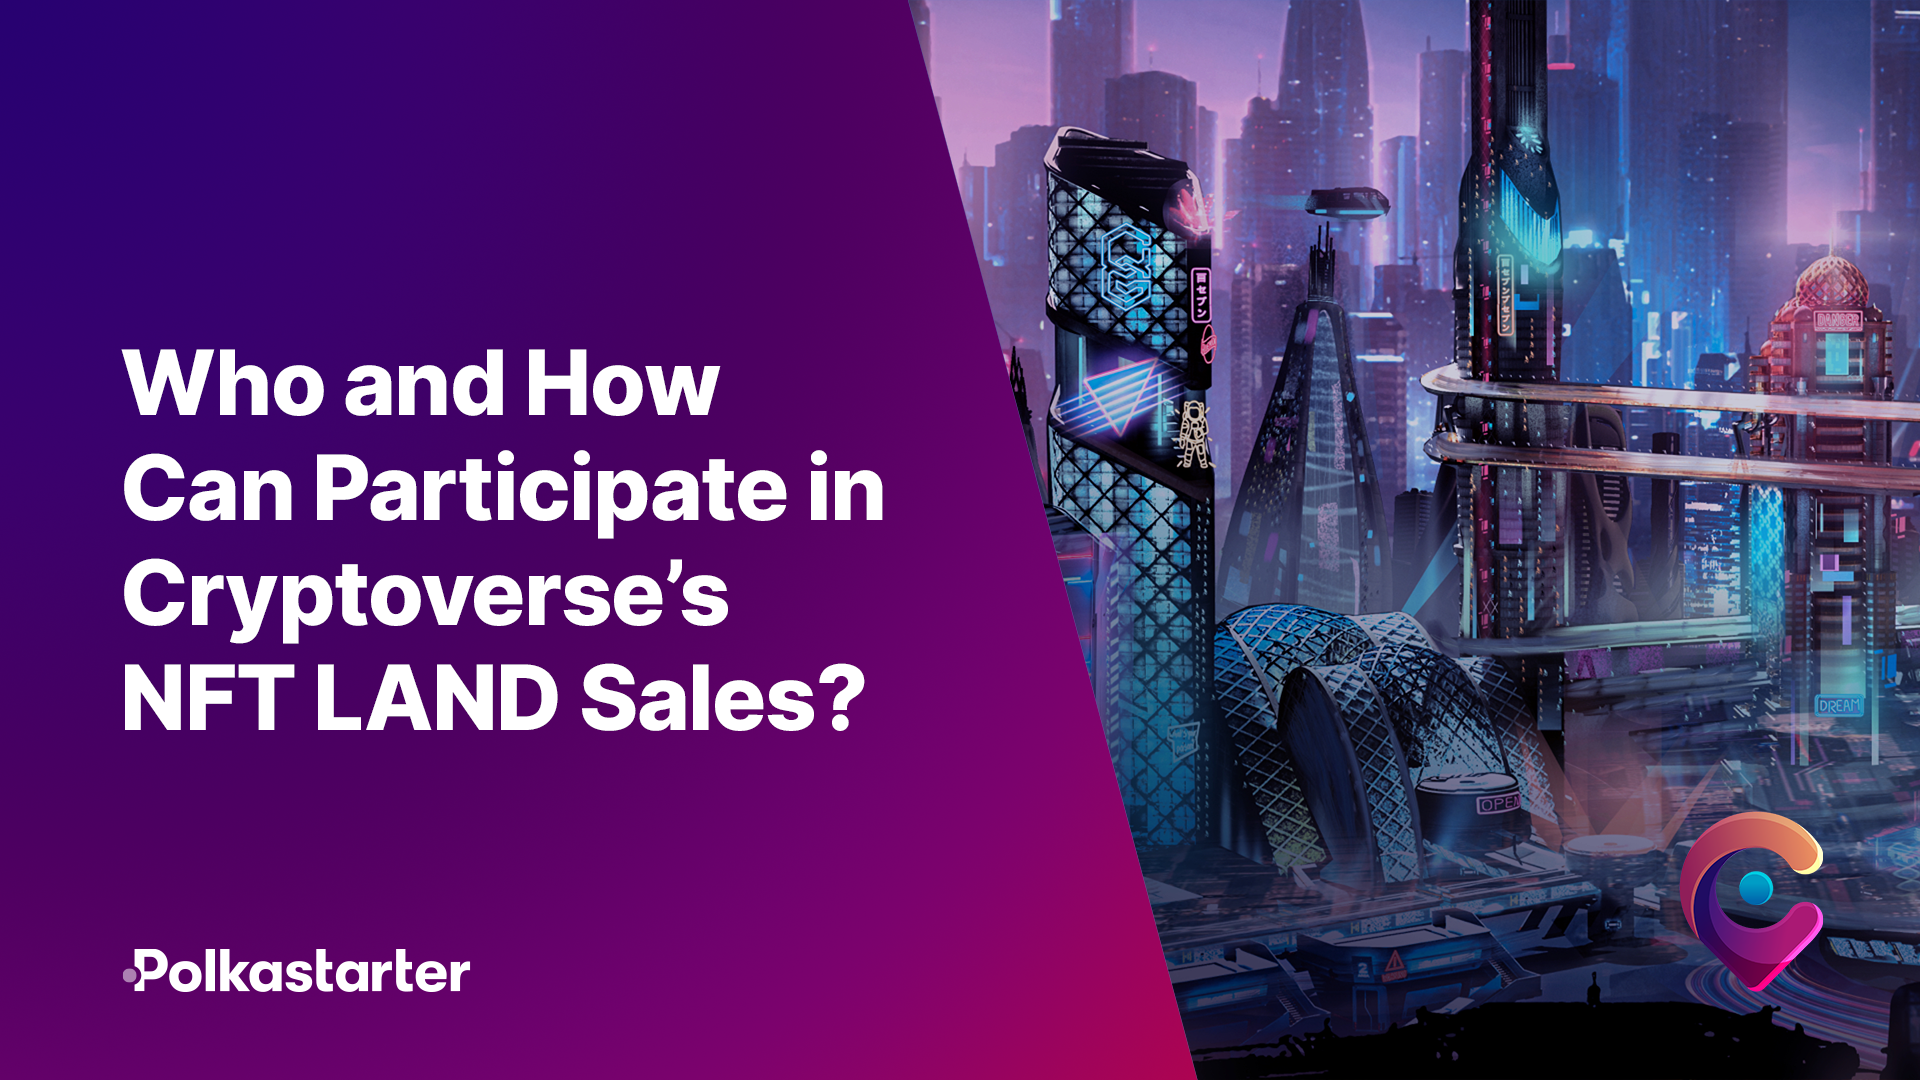 Who and How Can Participate in Cryptoverse’s NFT LAND Sales?